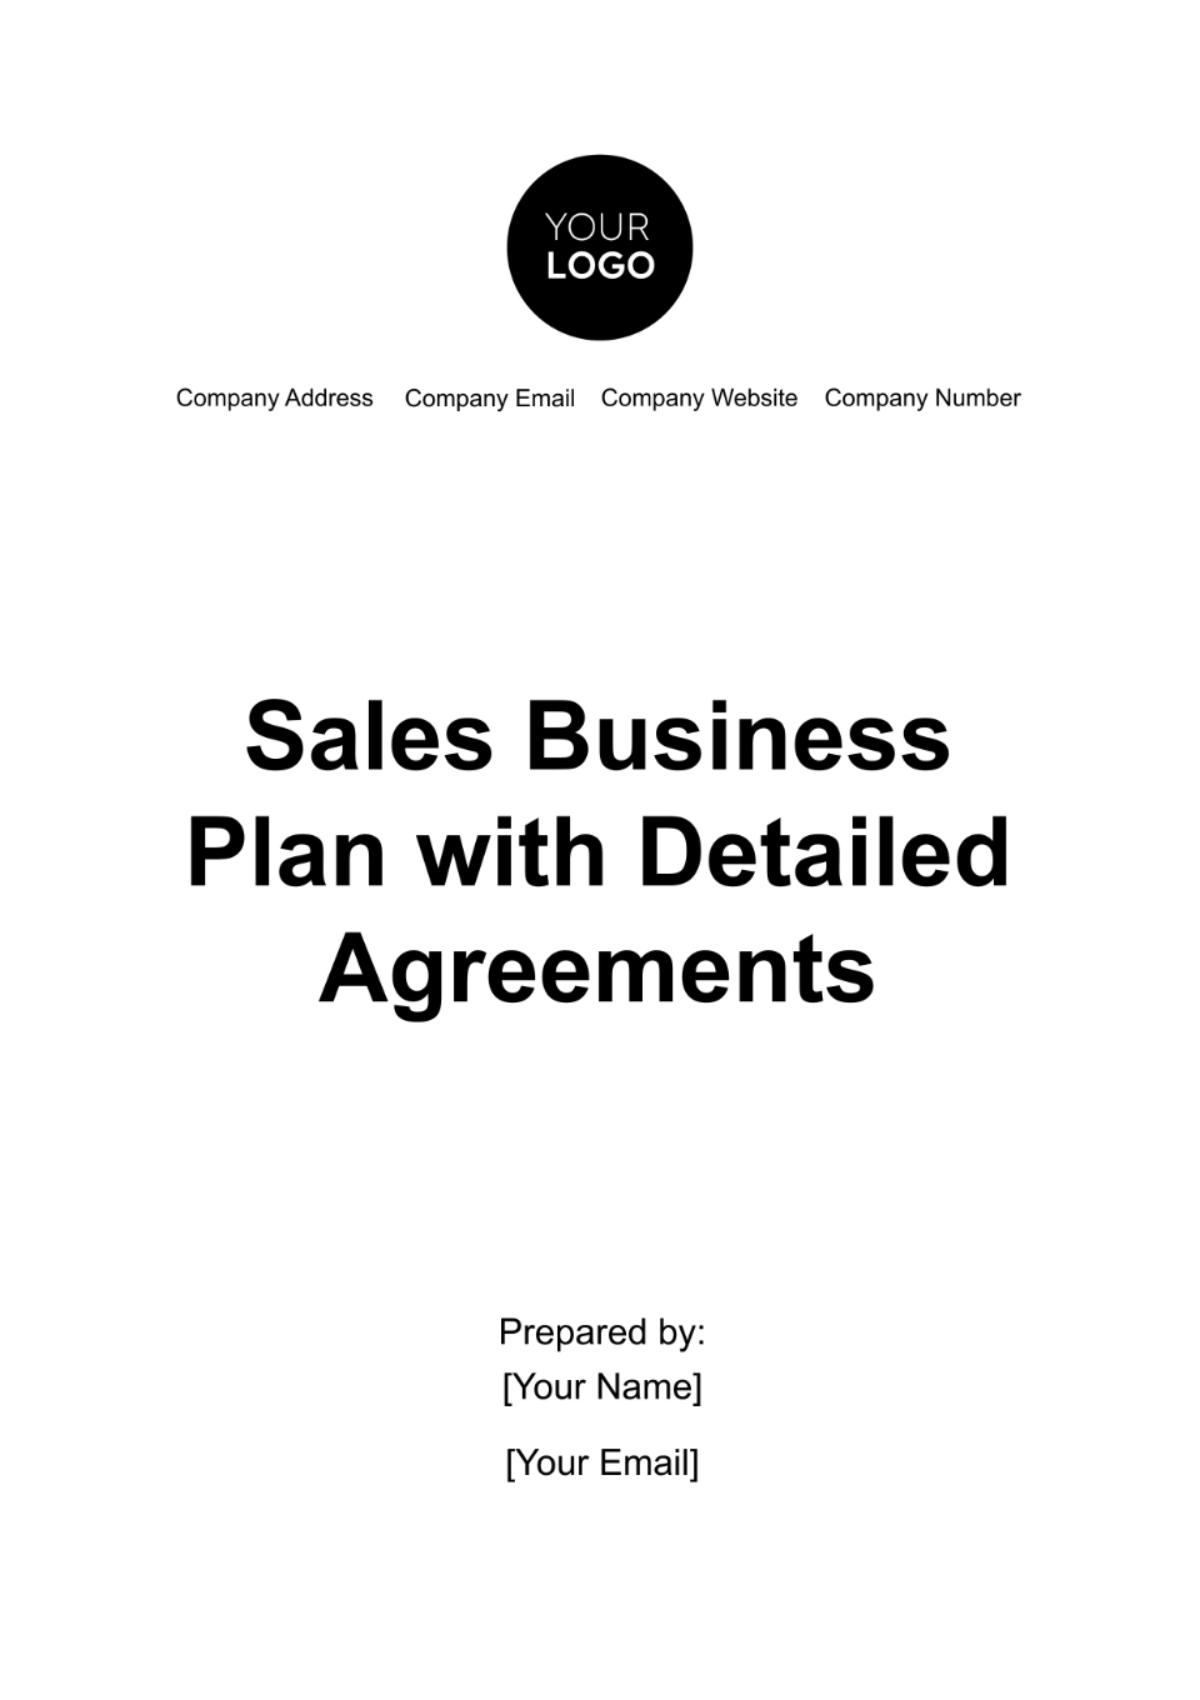 Free Sales Business Plan with Detailed Agreements Template